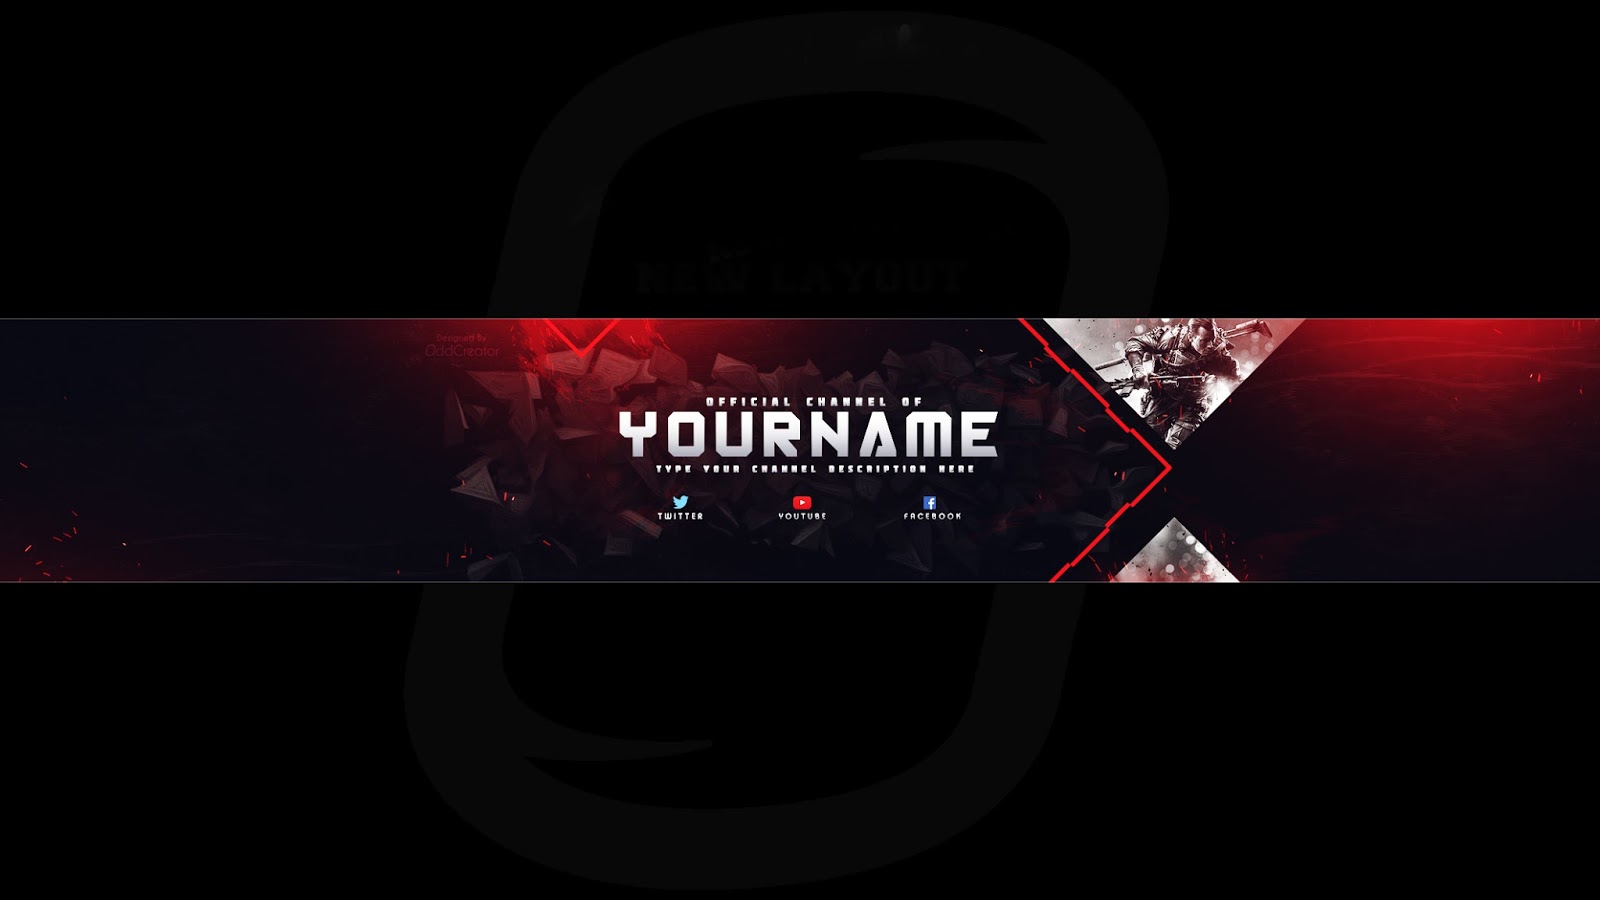 Top gaming  banner  Youtube  Channel Art Photoshop Template  